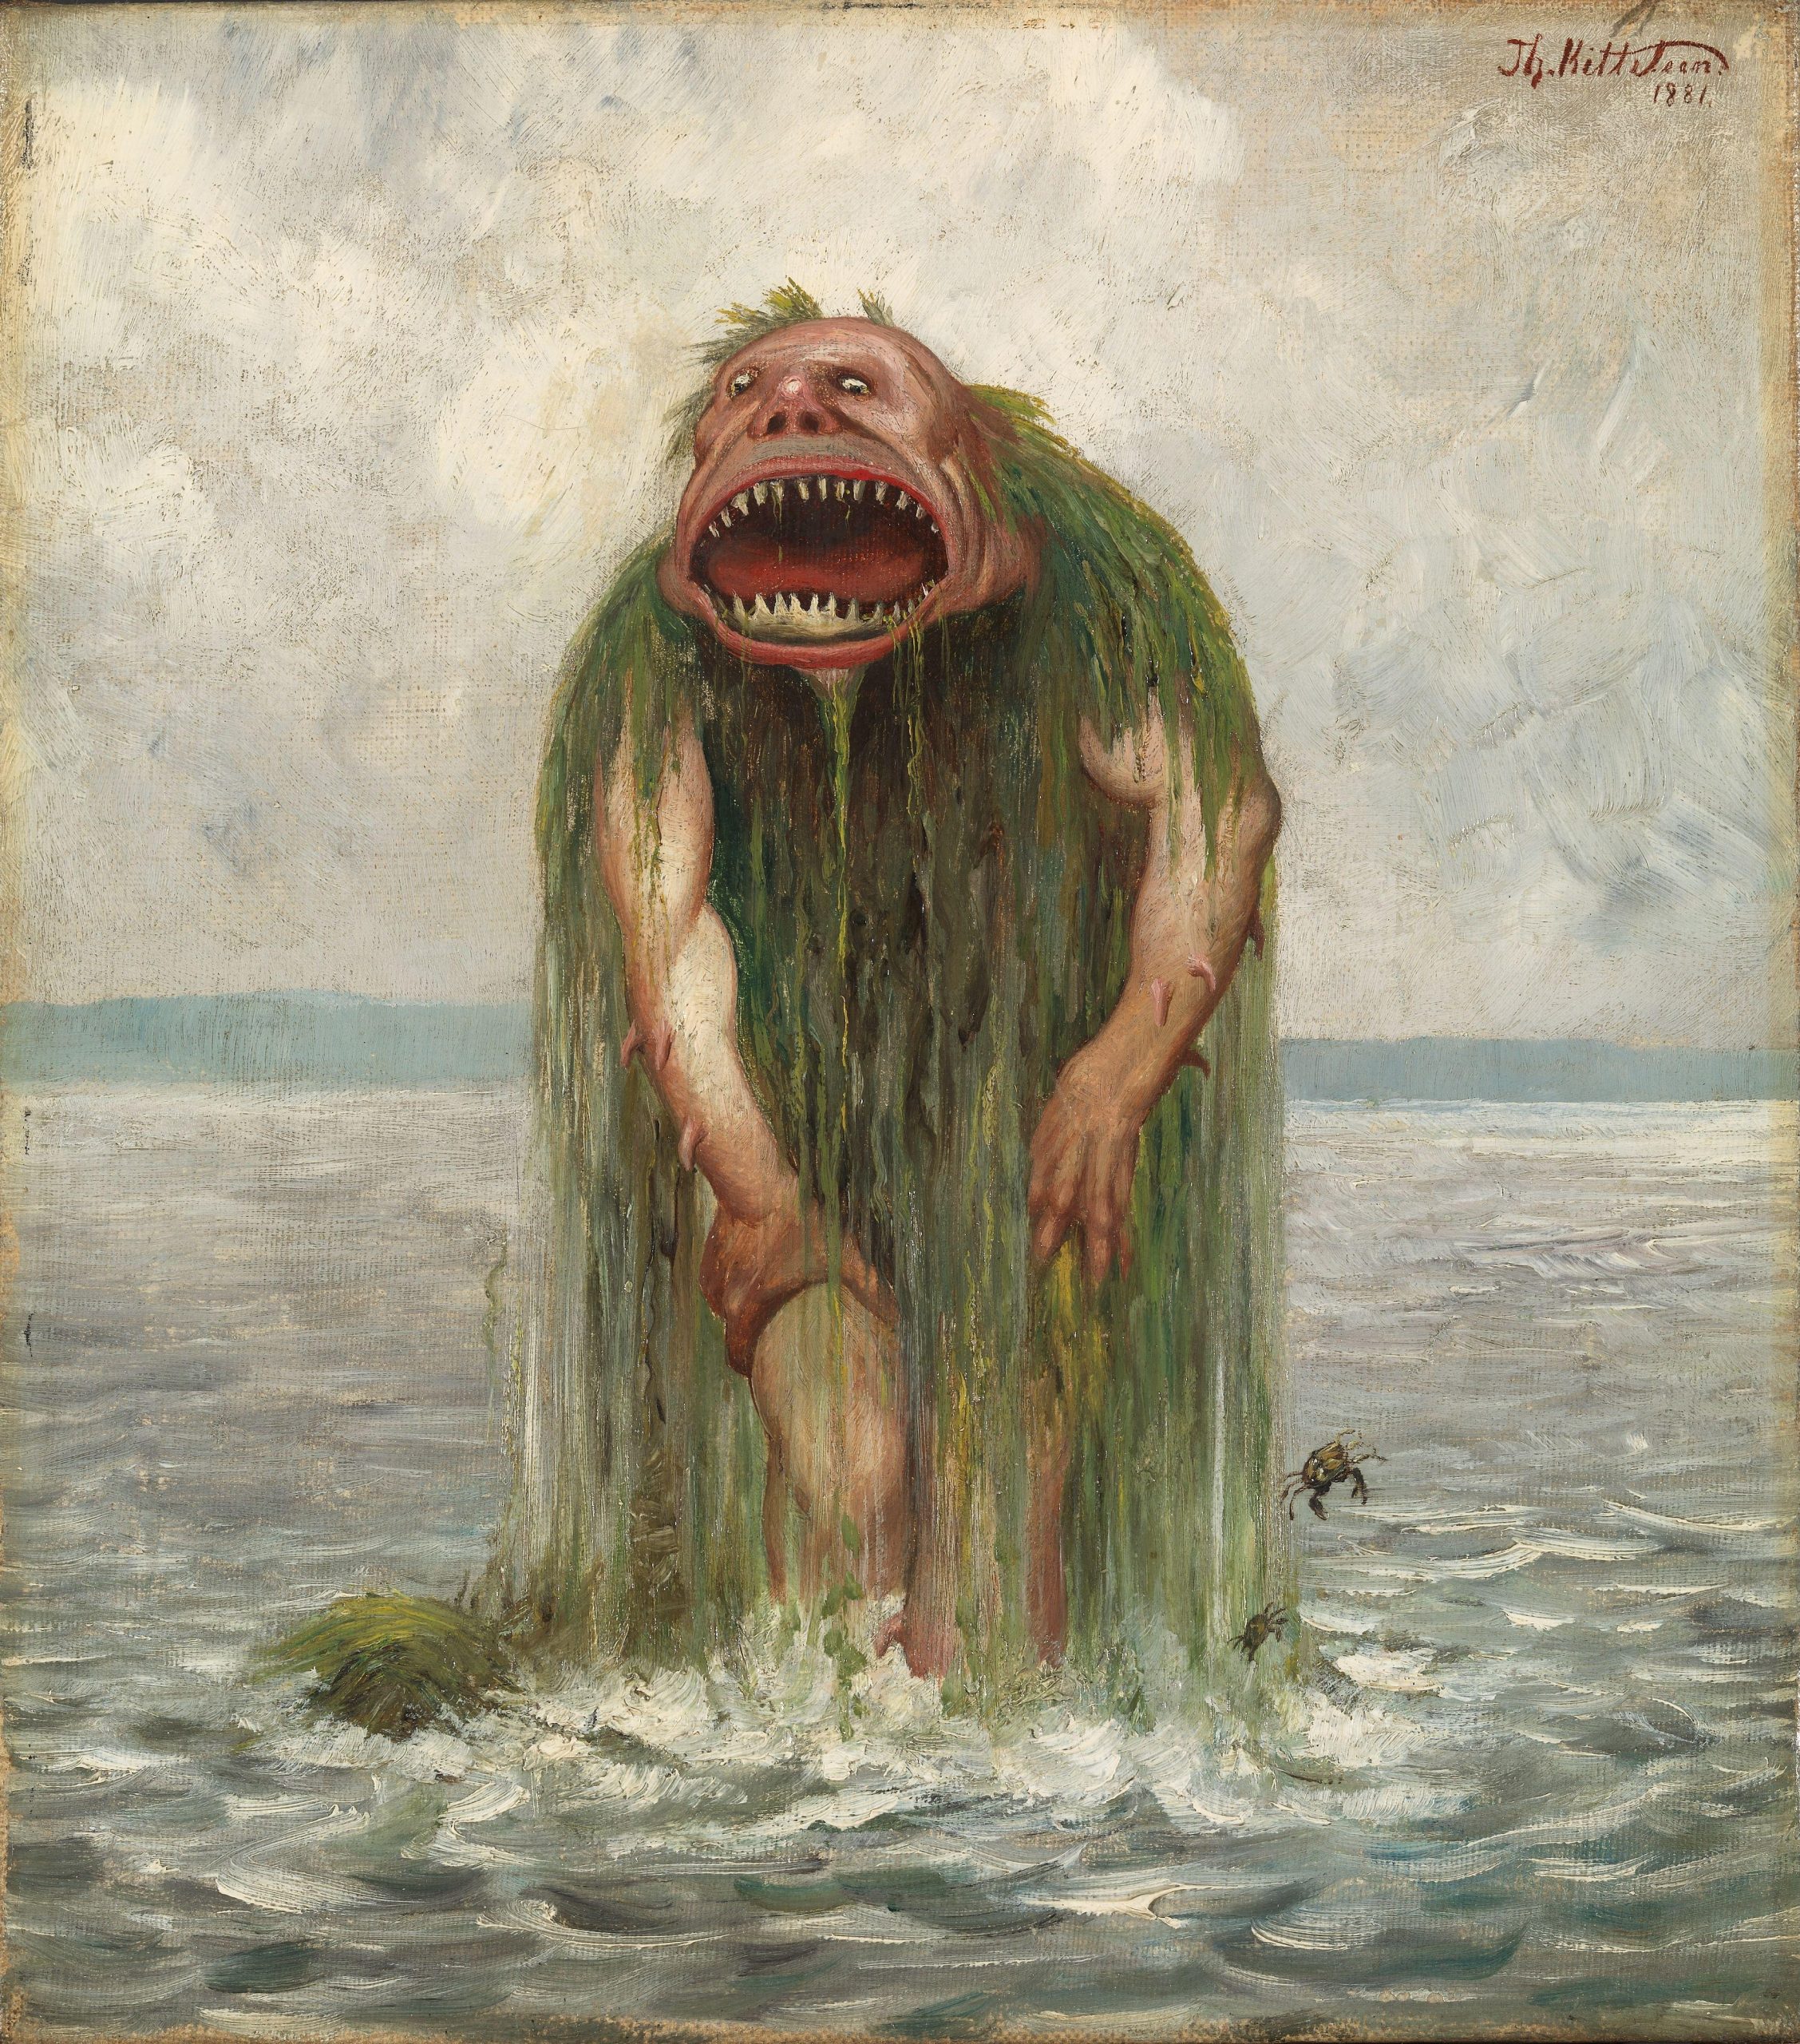 A swampy sea monster walks towards the shore from a large body of water.